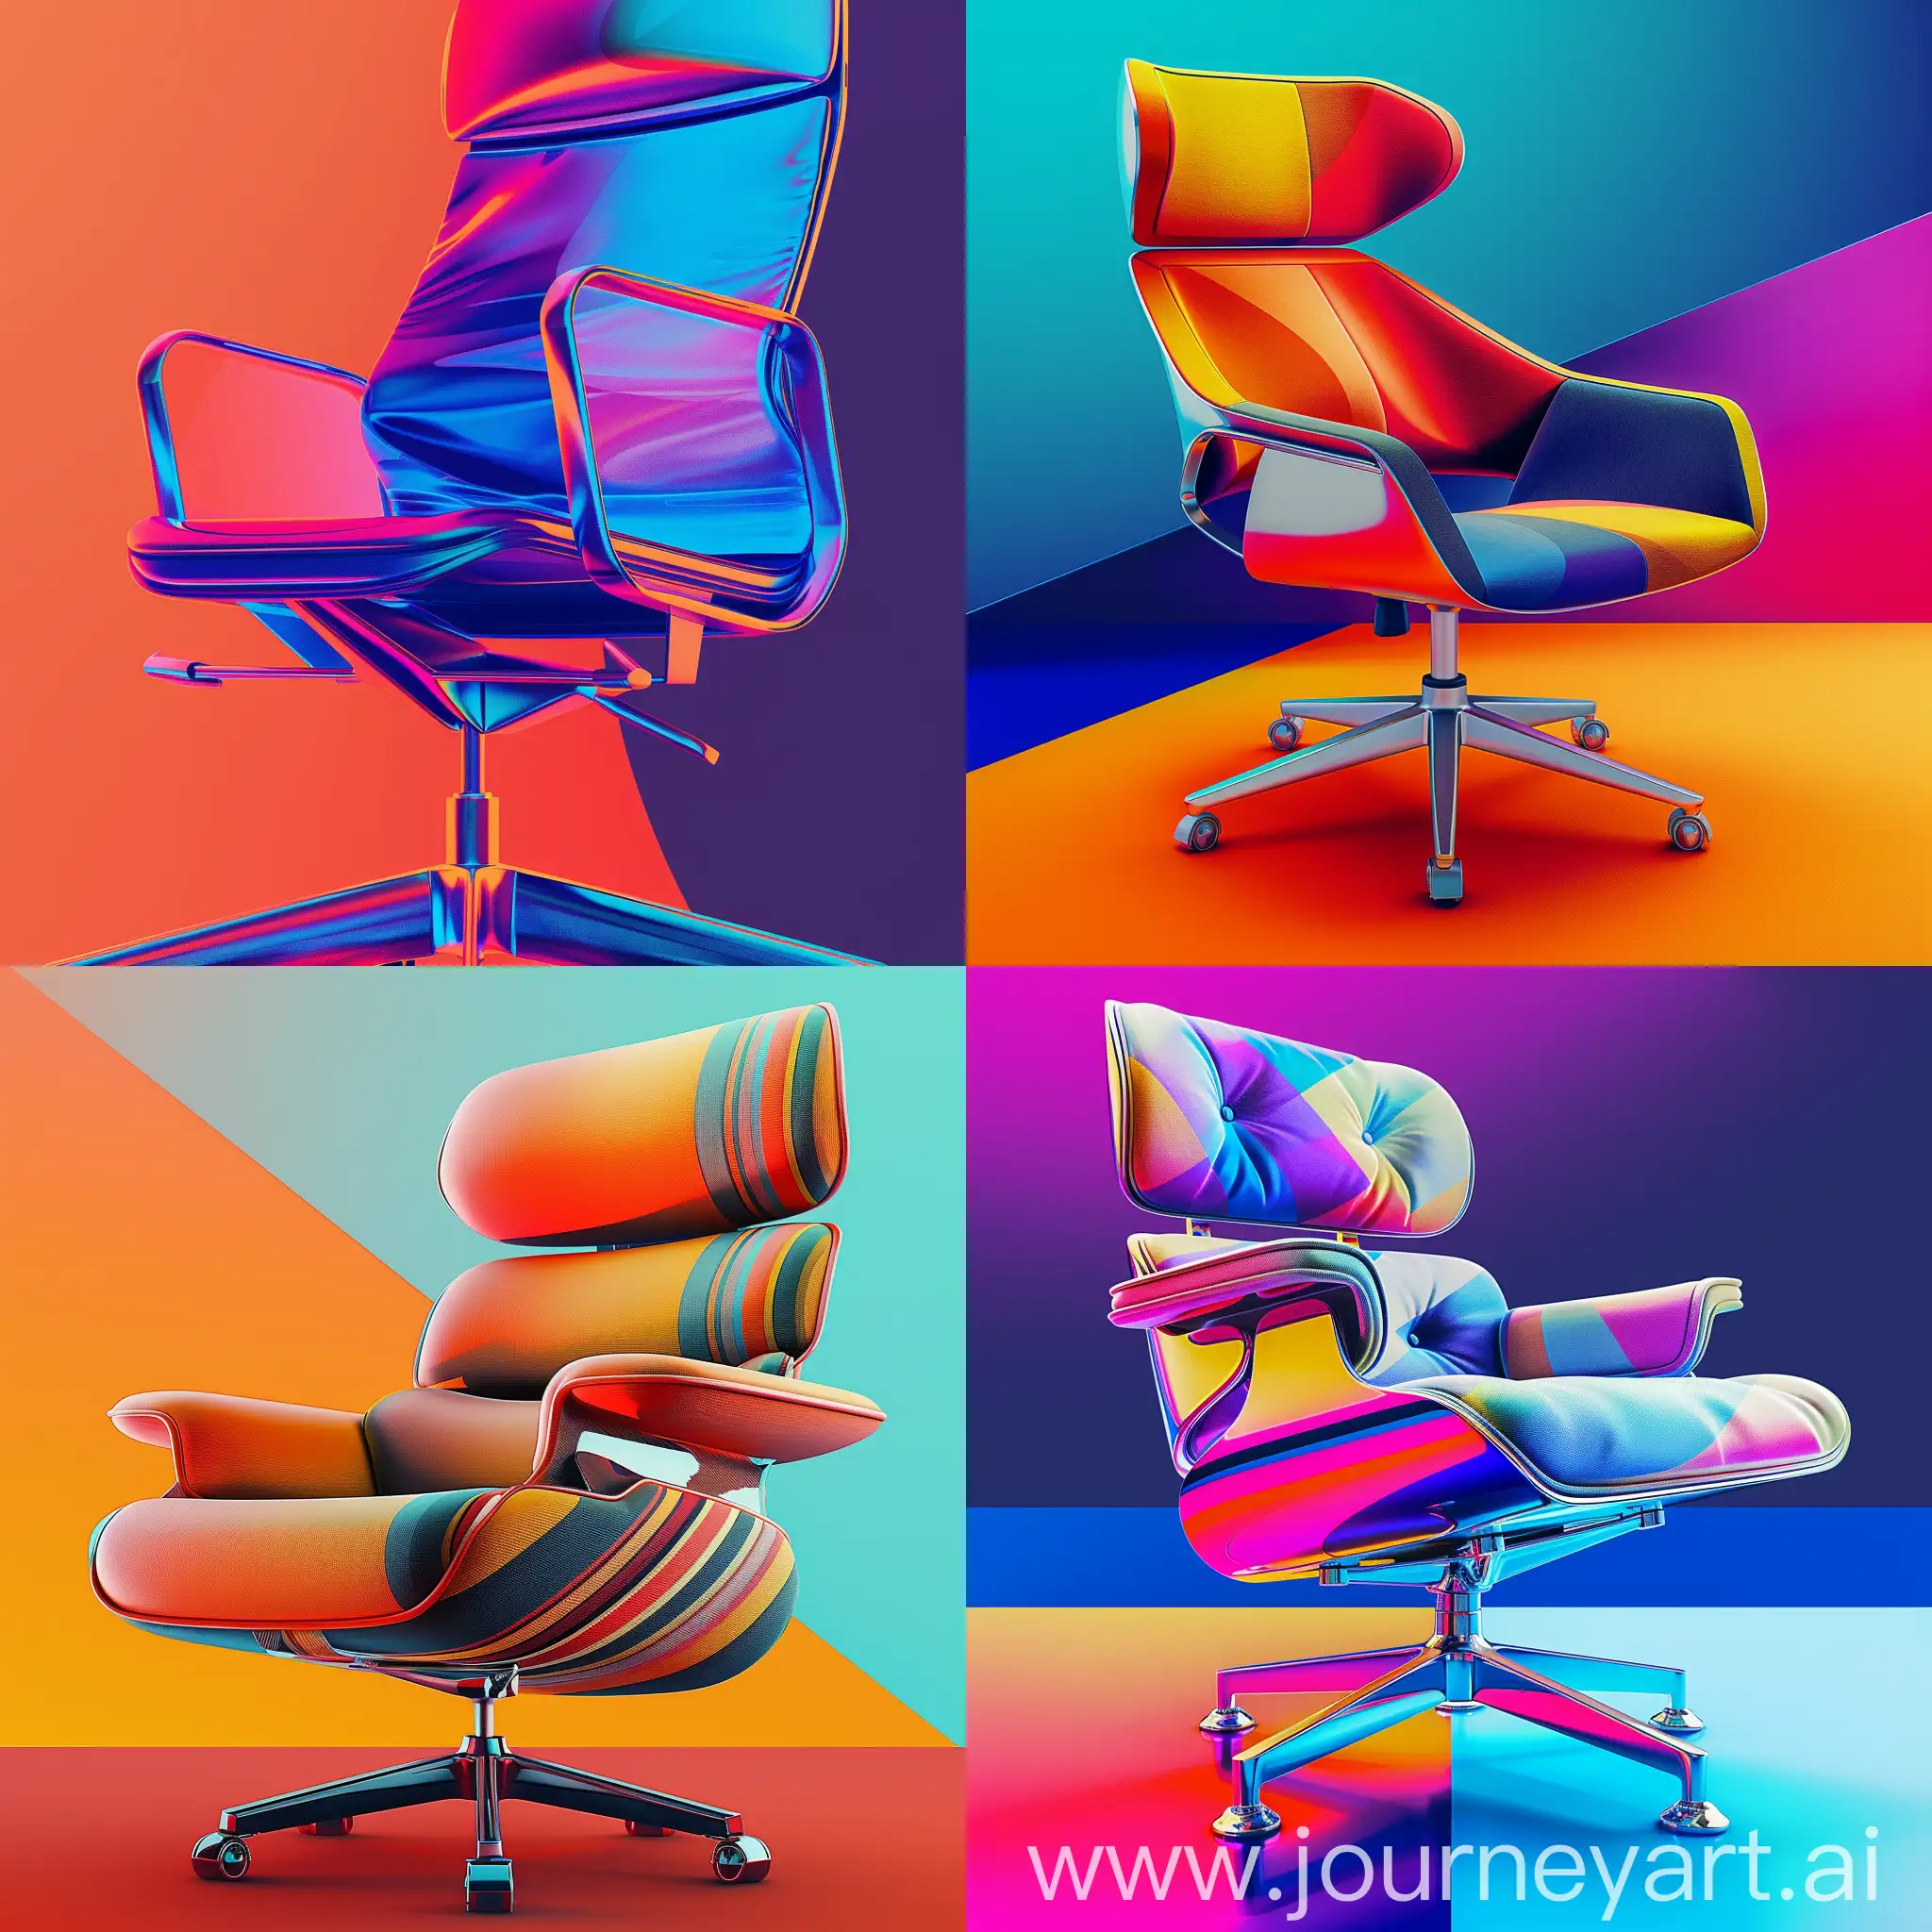 Generate an anamorphic digital image representing 'Most Comfortable Desk Chairs'. Highlight the comfort and ergonomics of desk chairs in a striking and professional manner. Use vibrant colors and contrasts to emphasize design details and functionality. Experiment with anamorphic perspectives and distortions to create an optical illusion reinforcing the feeling of comfort. The image should convey a sense of modernity and elegance, with graphic elements suggesting the well-being and productivity these chairs offer